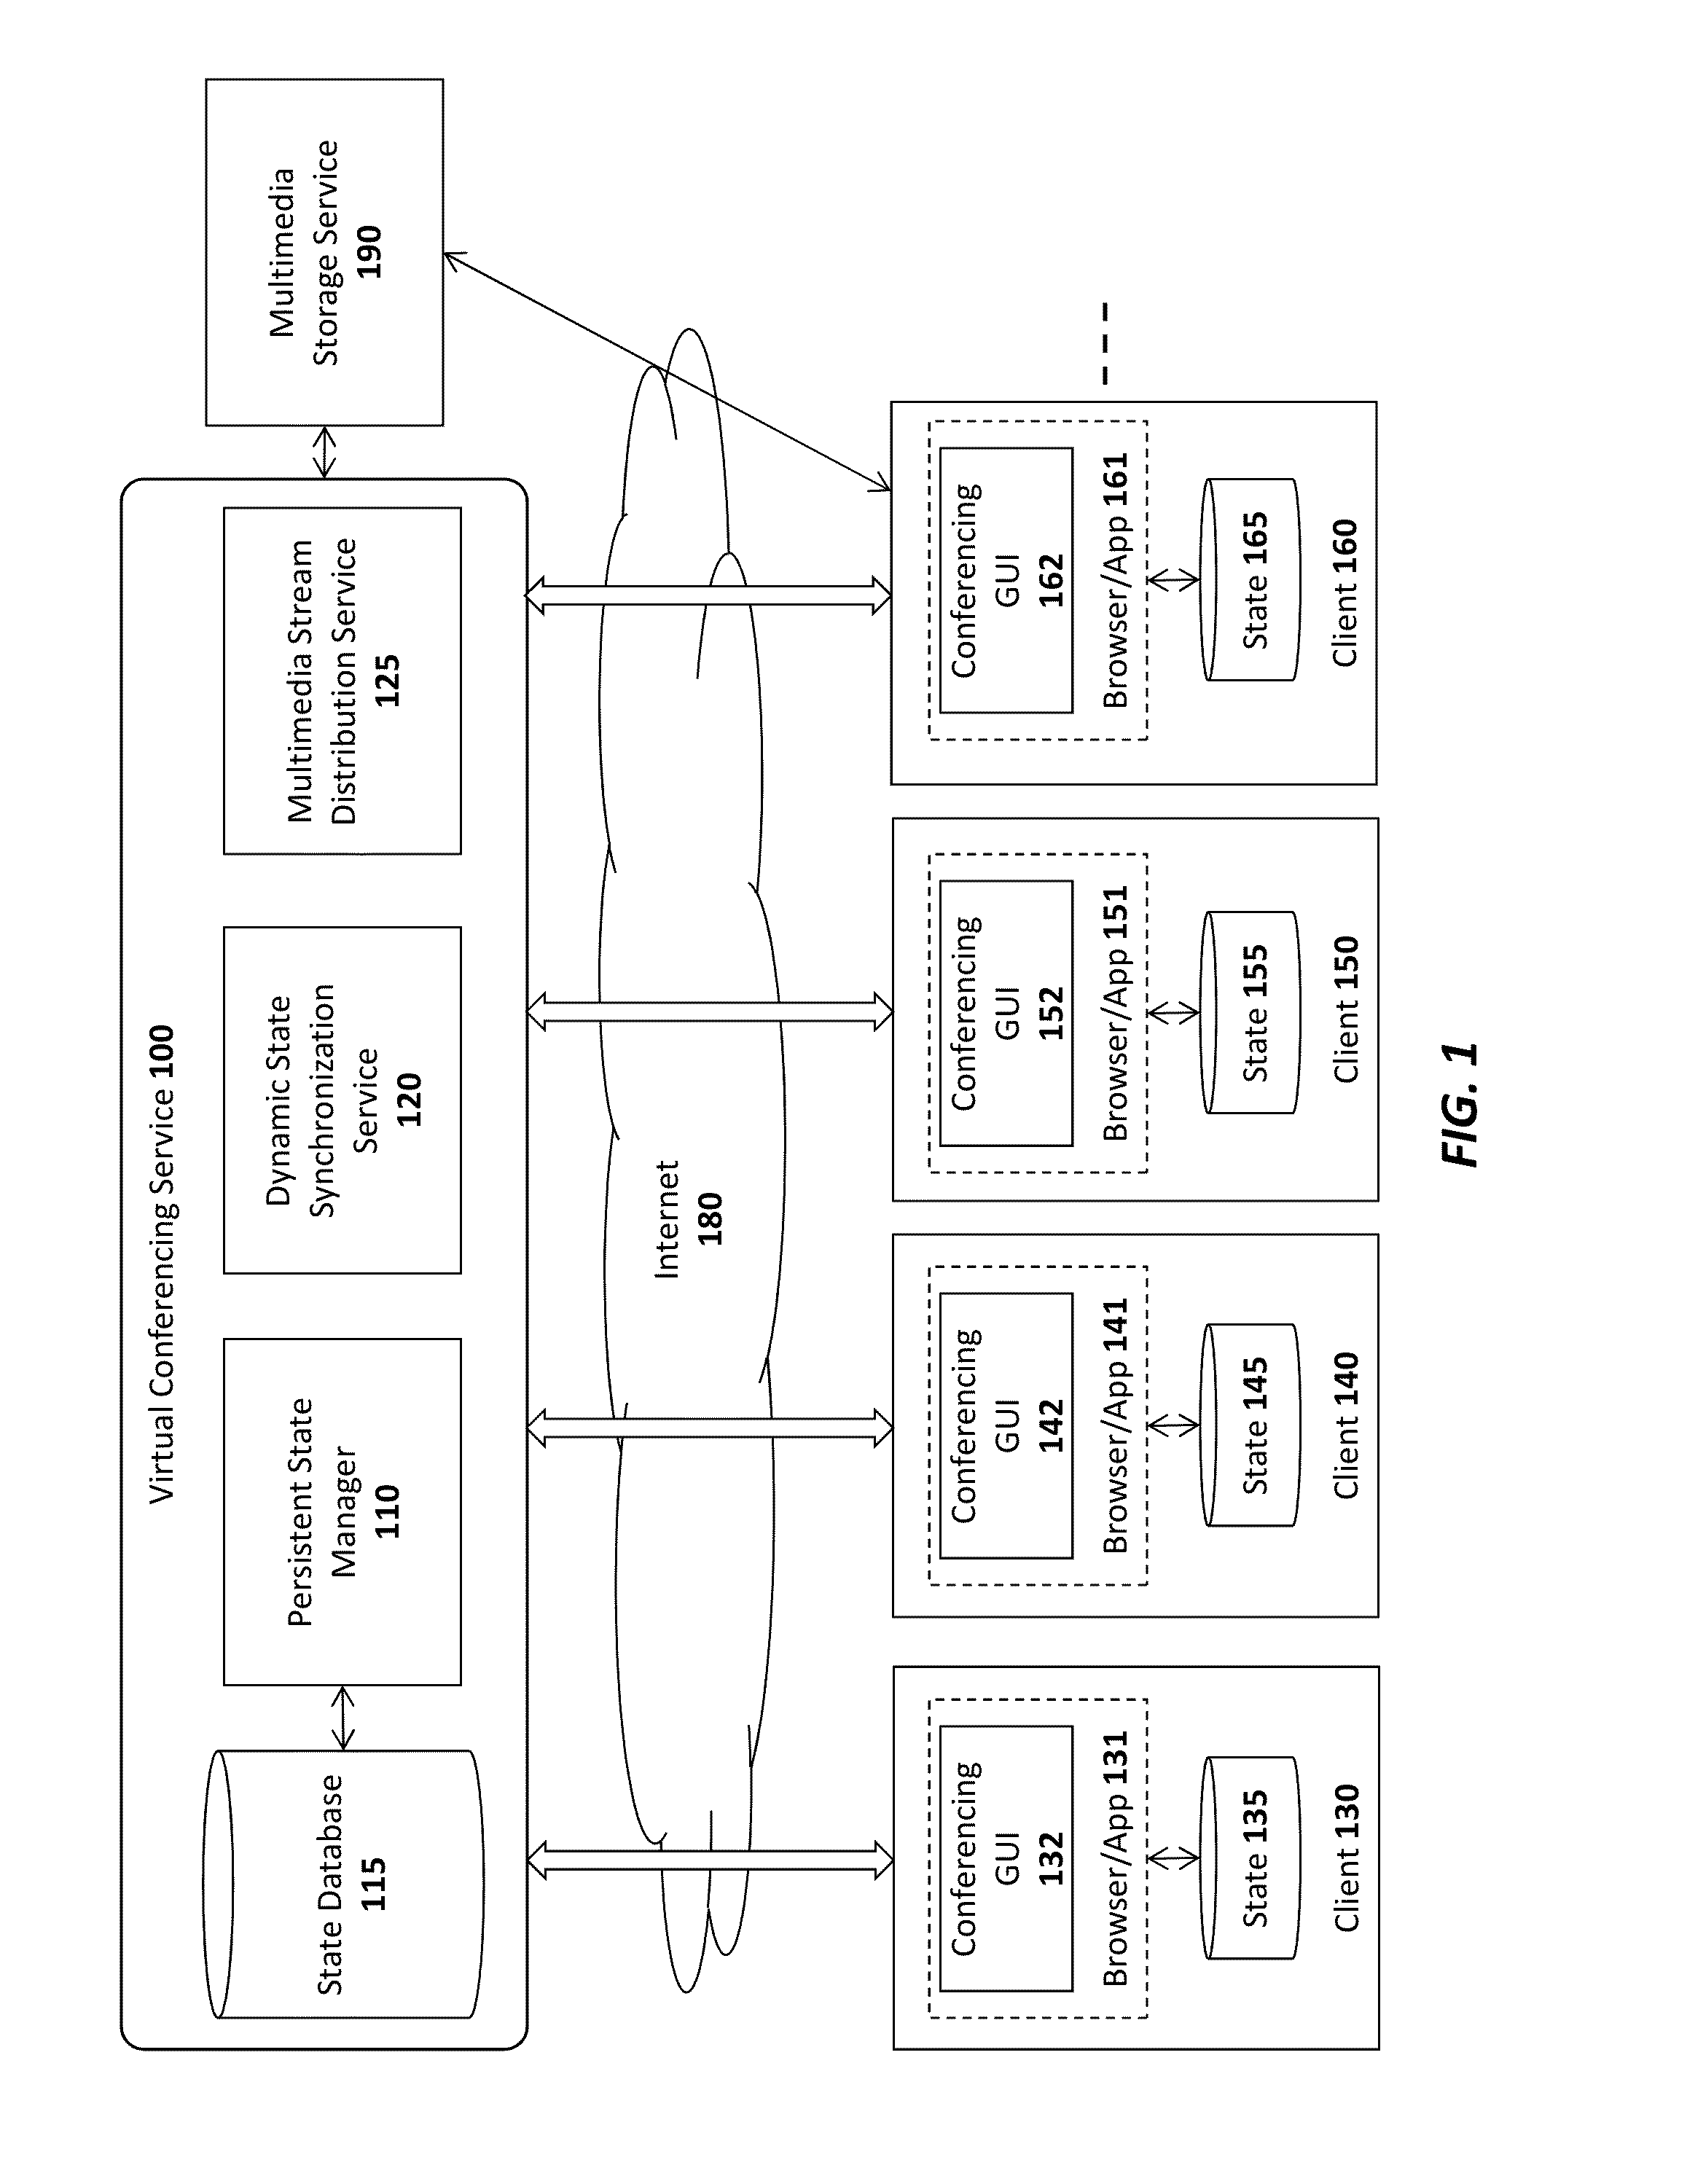 Participation queue system and method for online video conferencing